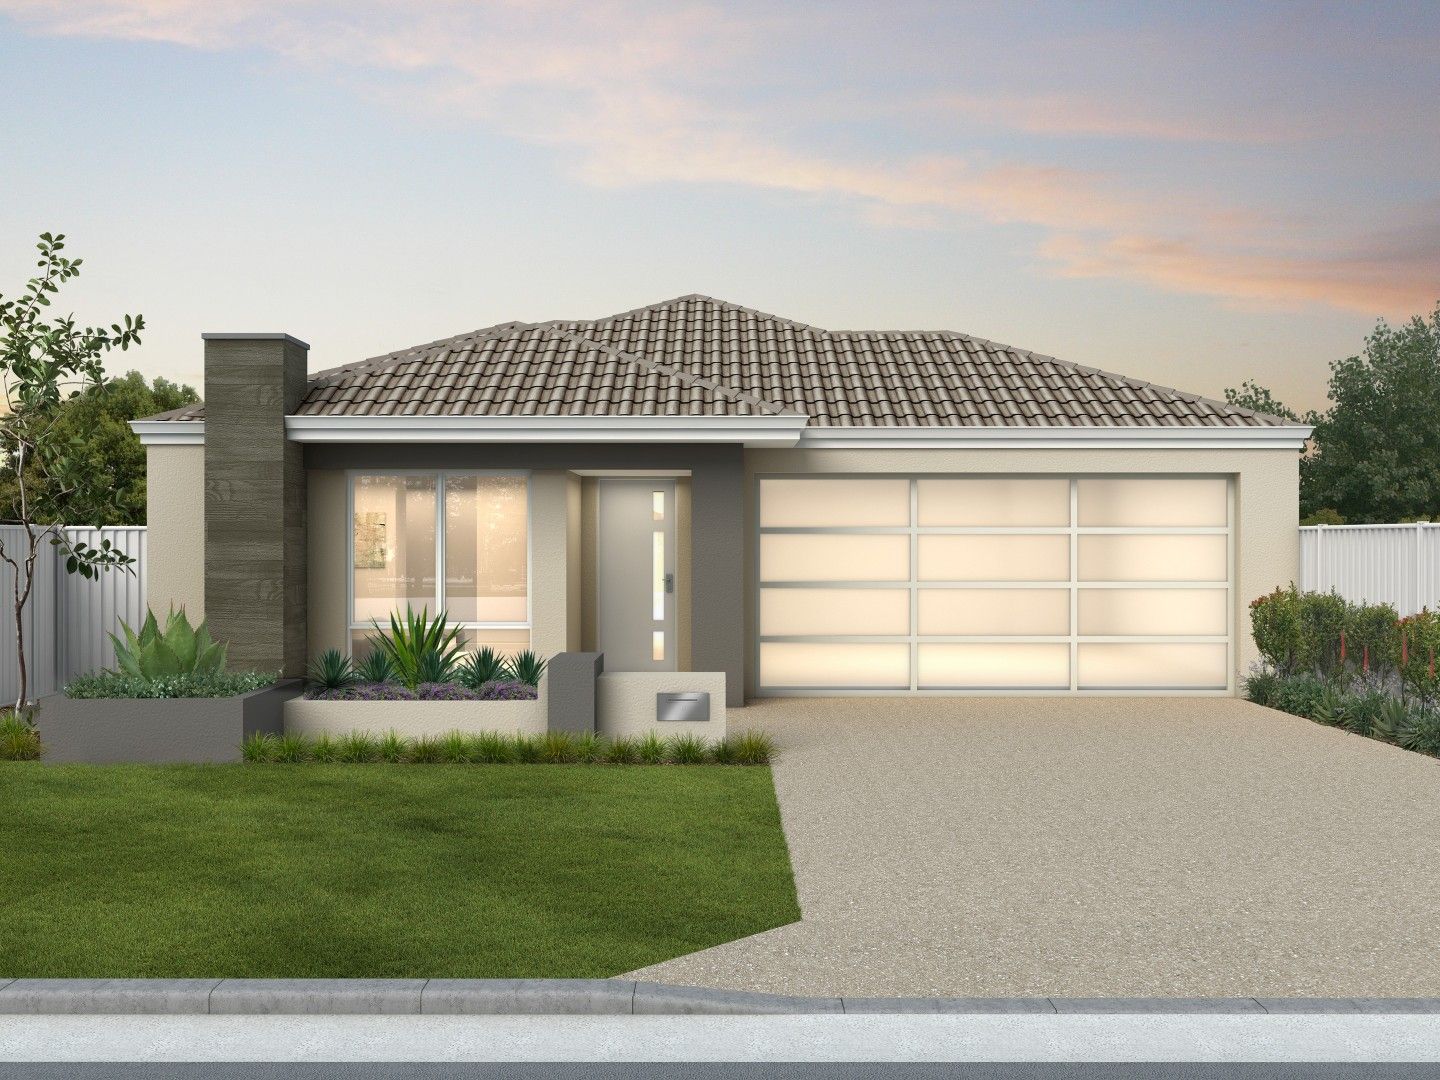 3 bedrooms New House & Land in  HAMERSLEY WA, 6022